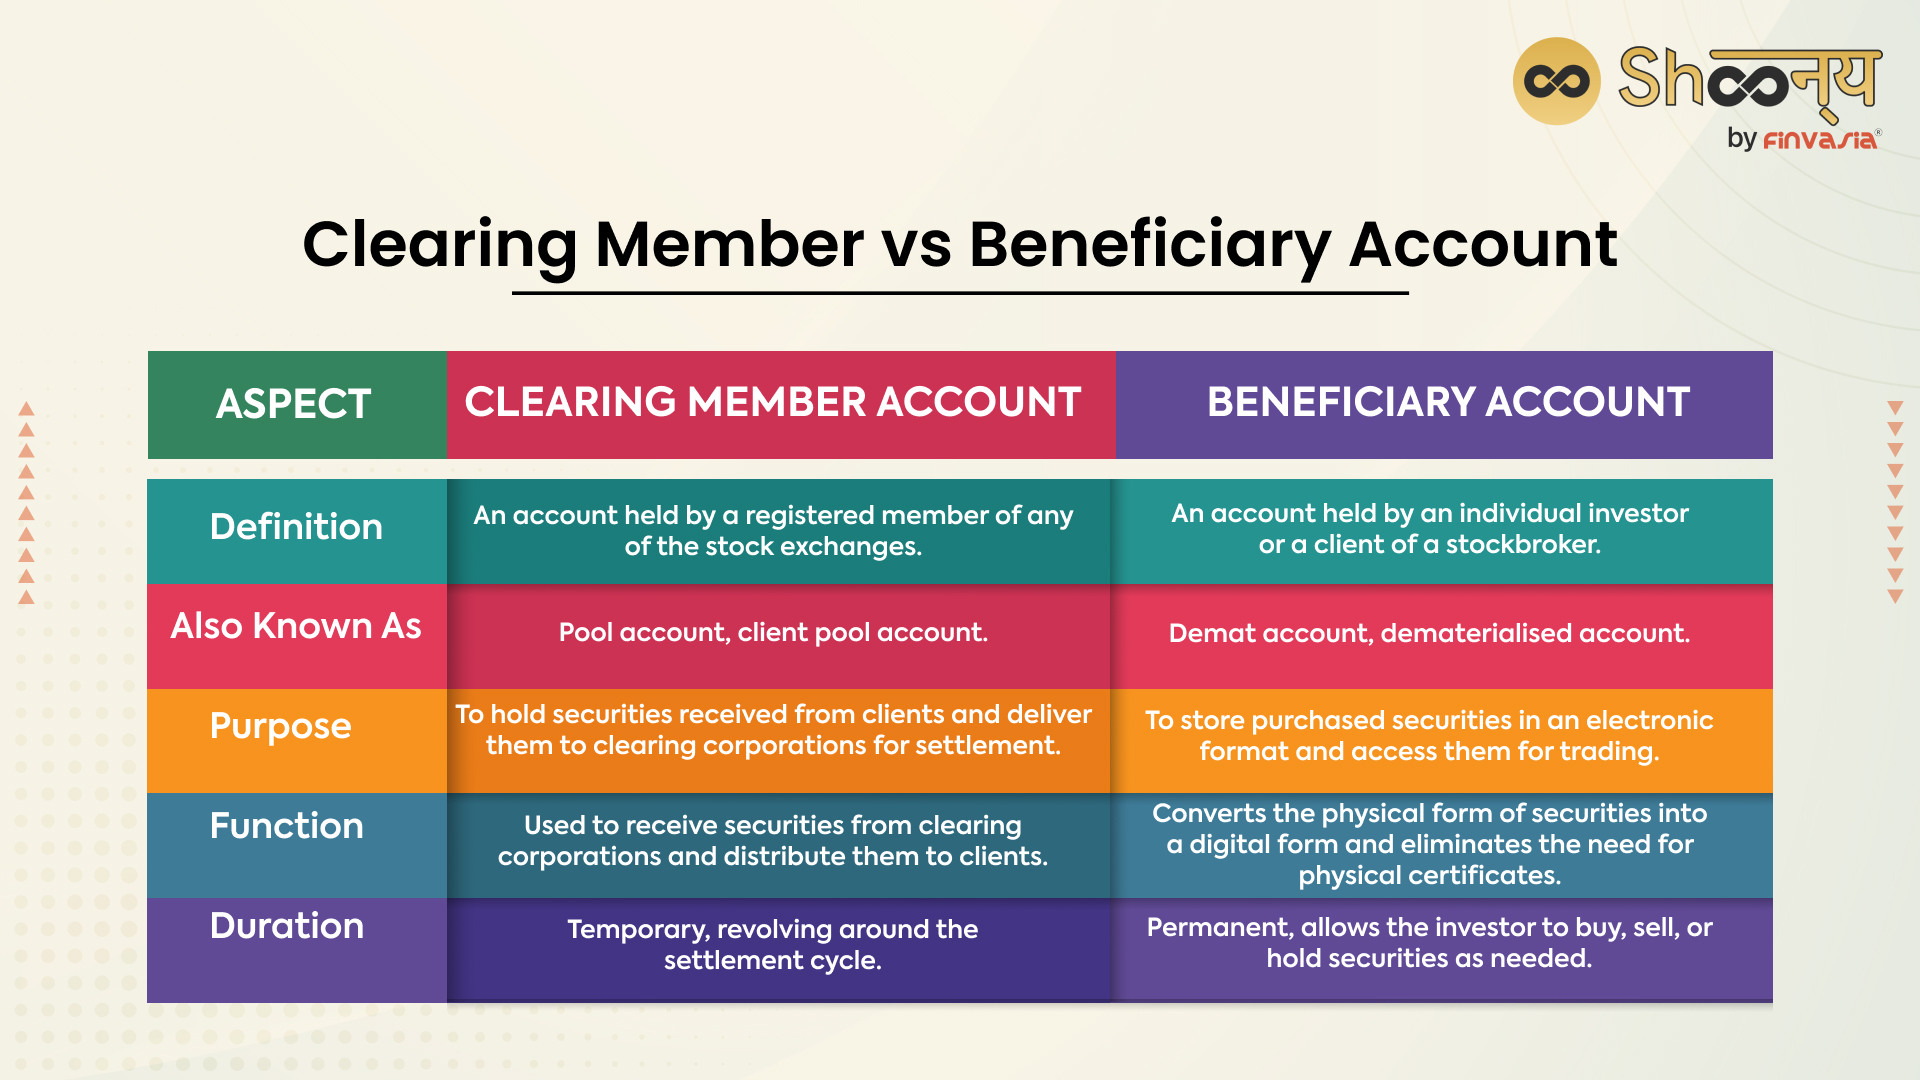 Clearing Member vs Beneficiary Account